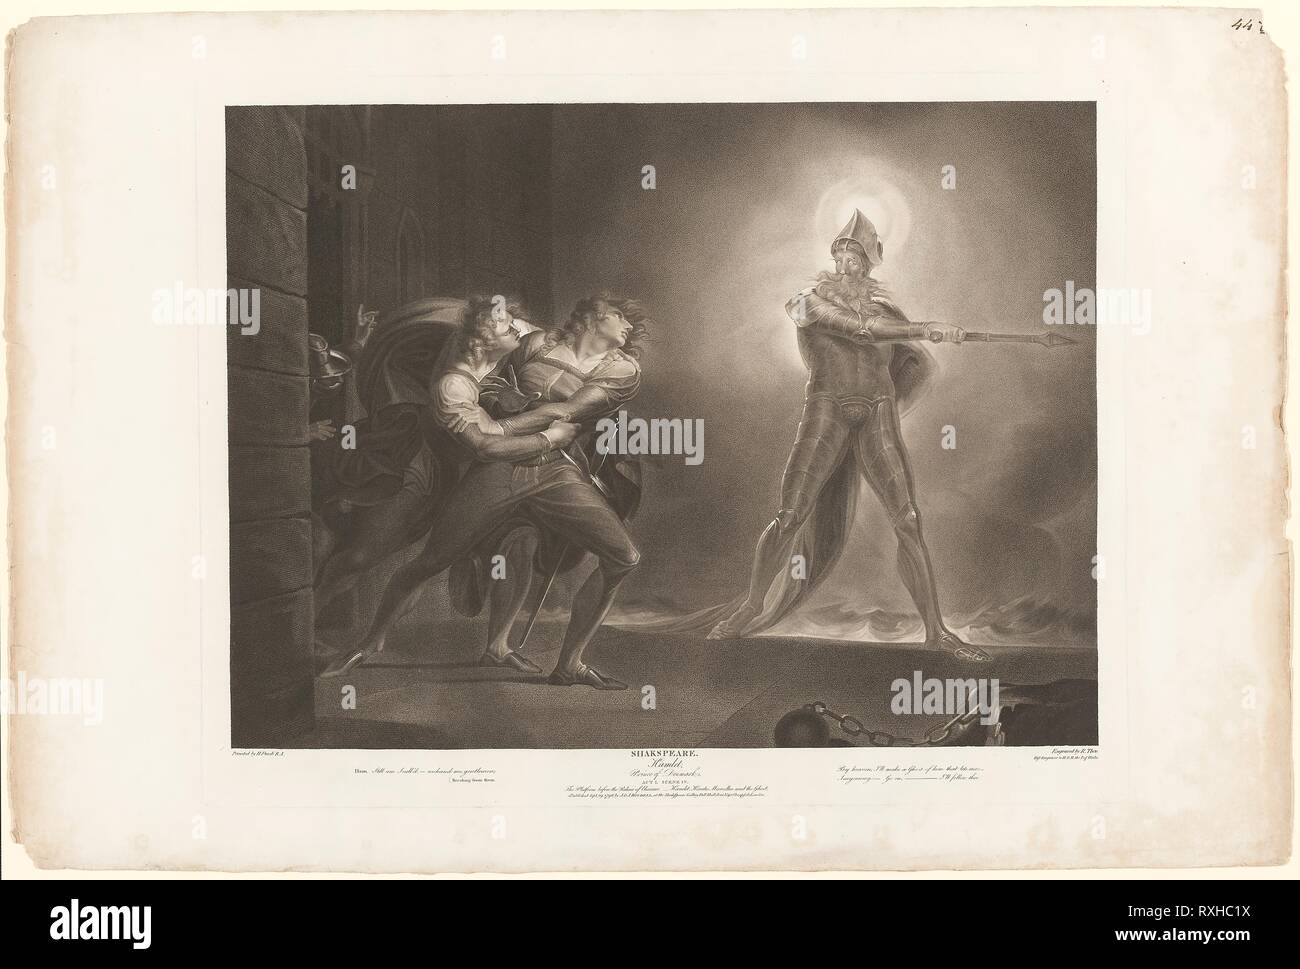 Hamlet, Horatio, Marcellus and the Ghost. Robert Thew (English, 1758-1802); after Henry Fuseli (Swiss, active in England, 1741-1825); published by John Boydell (English, 1719-1804); authored by William Shakespeare (English, 1564-1616). Date: 1796. Dimensions: 502 × 637 mm (plate); 593 × 880 mm (sheet). Engraving on ivory wove paper. Origin: England. Museum: The Chicago Art Institute. Stock Photo